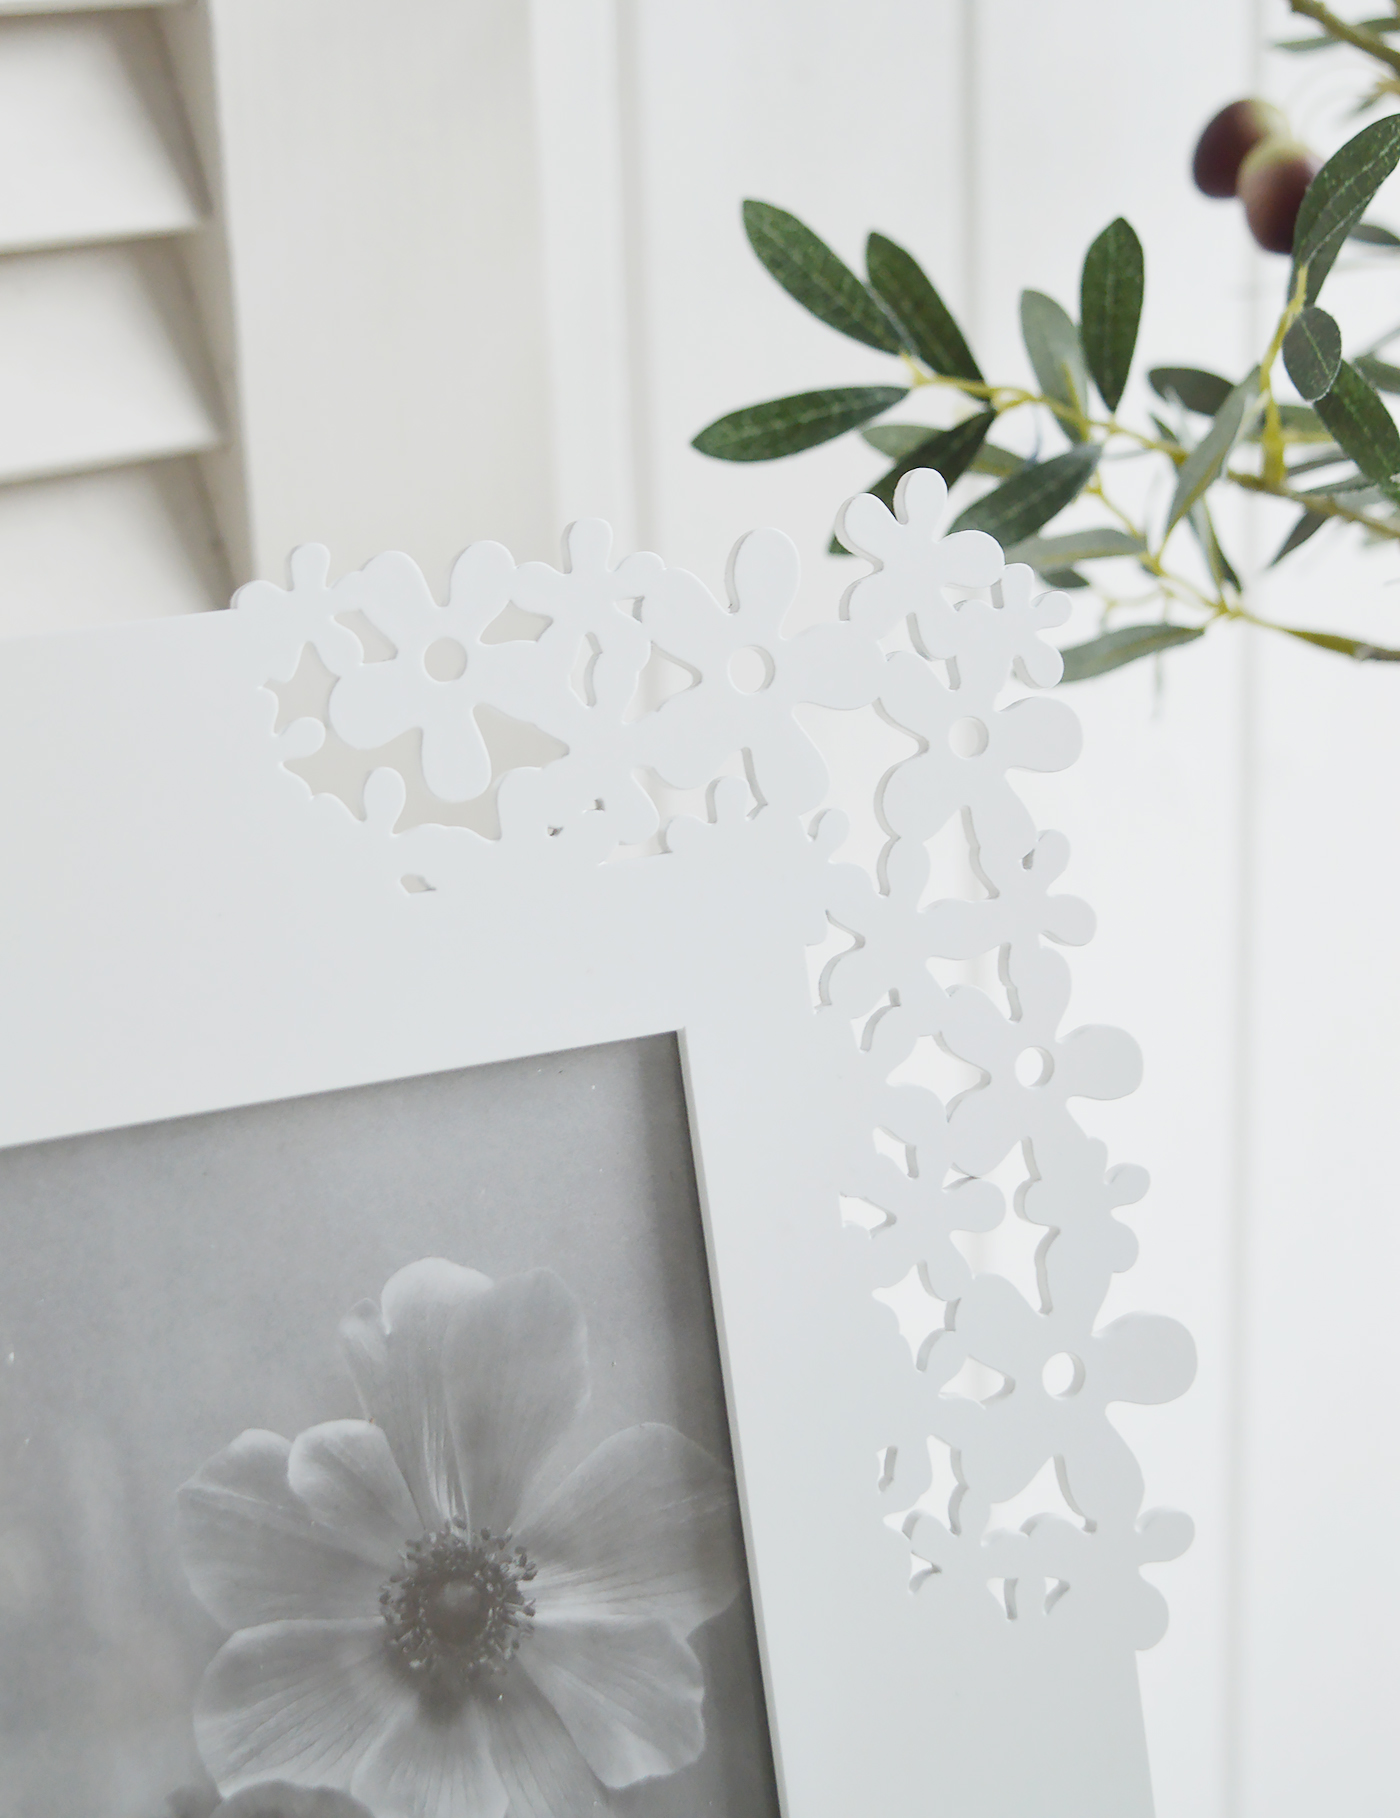 White Wooden Photo Frames - New England Coastal, Farmhouse, City and Country Furniture Homes and Interiors - Flower photo frame